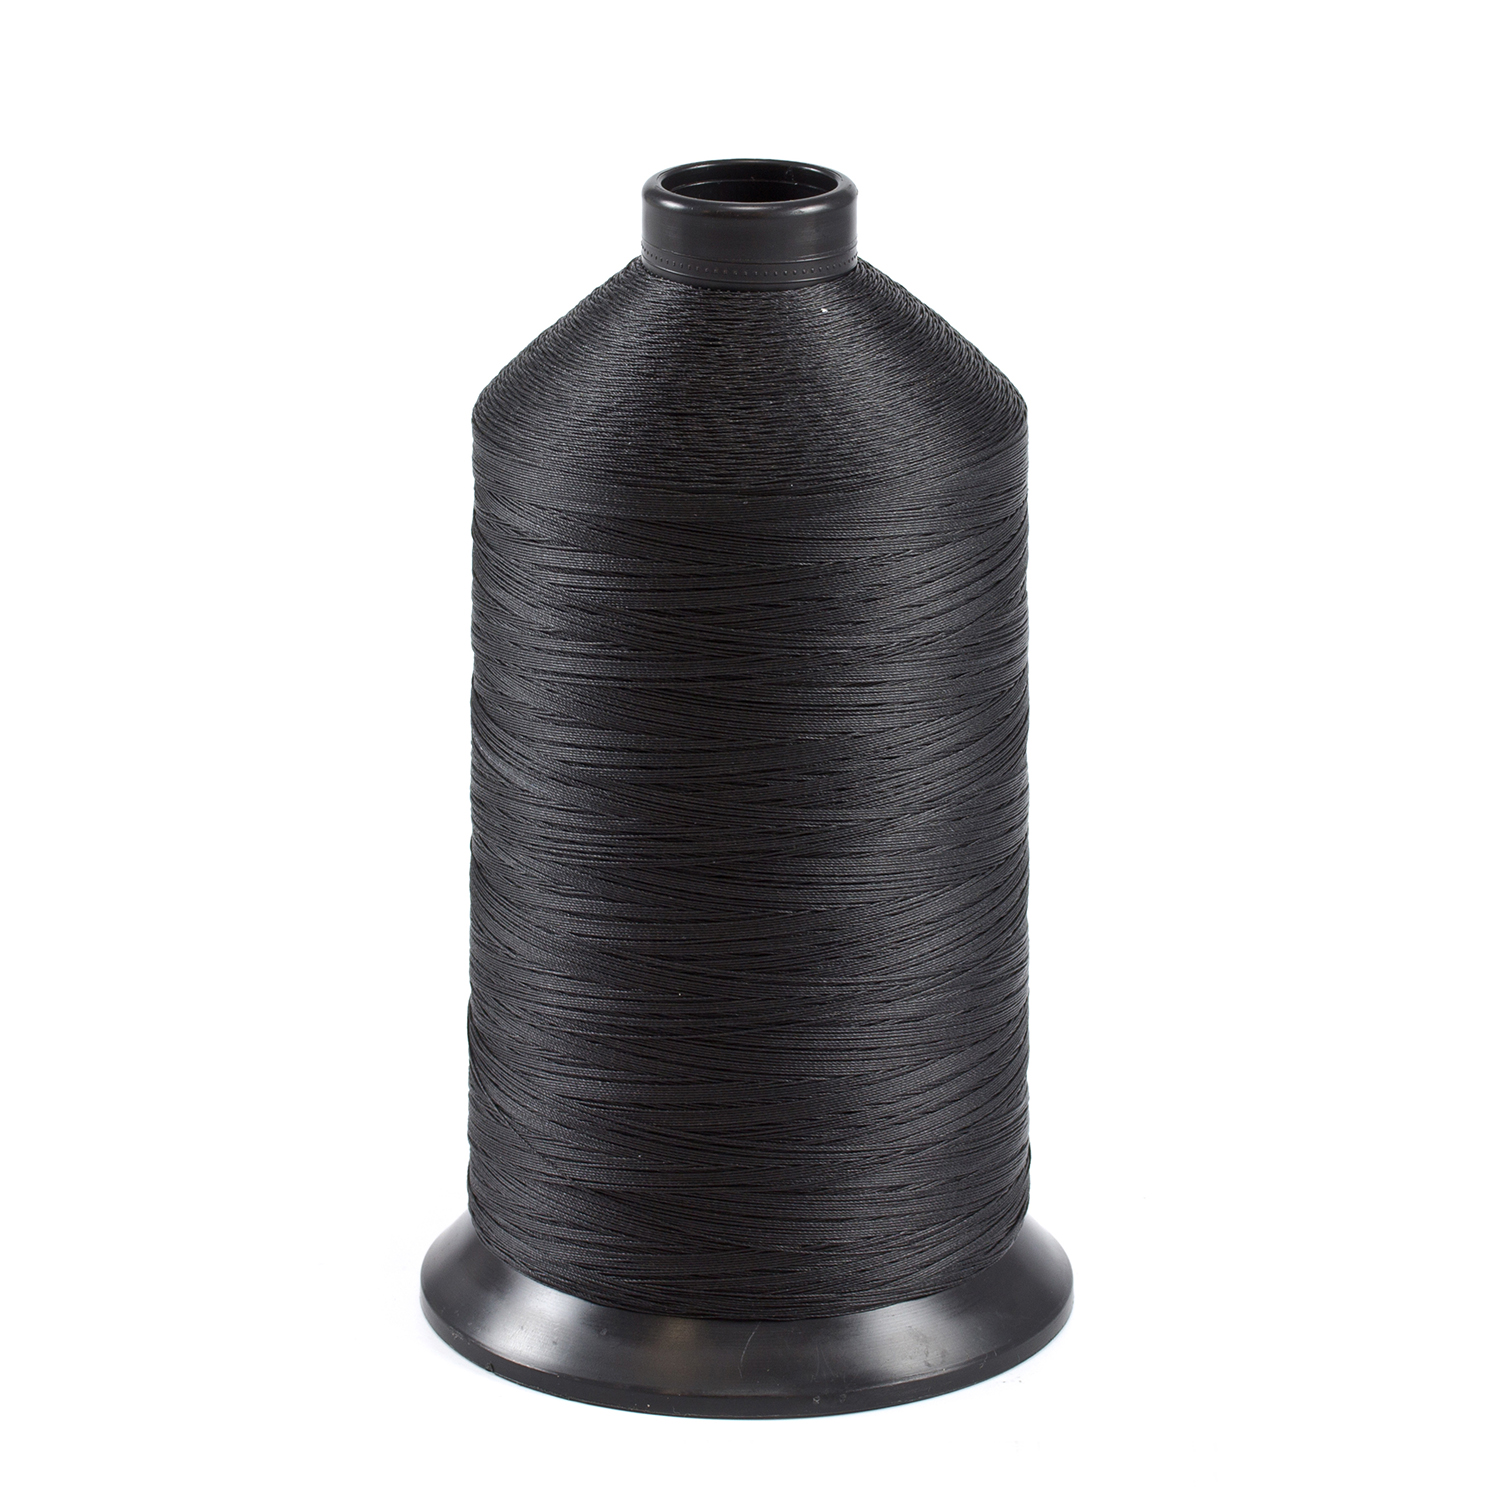 A&E SunStop Twisted Non-Wick Polyester Thread Size T90 #66501 